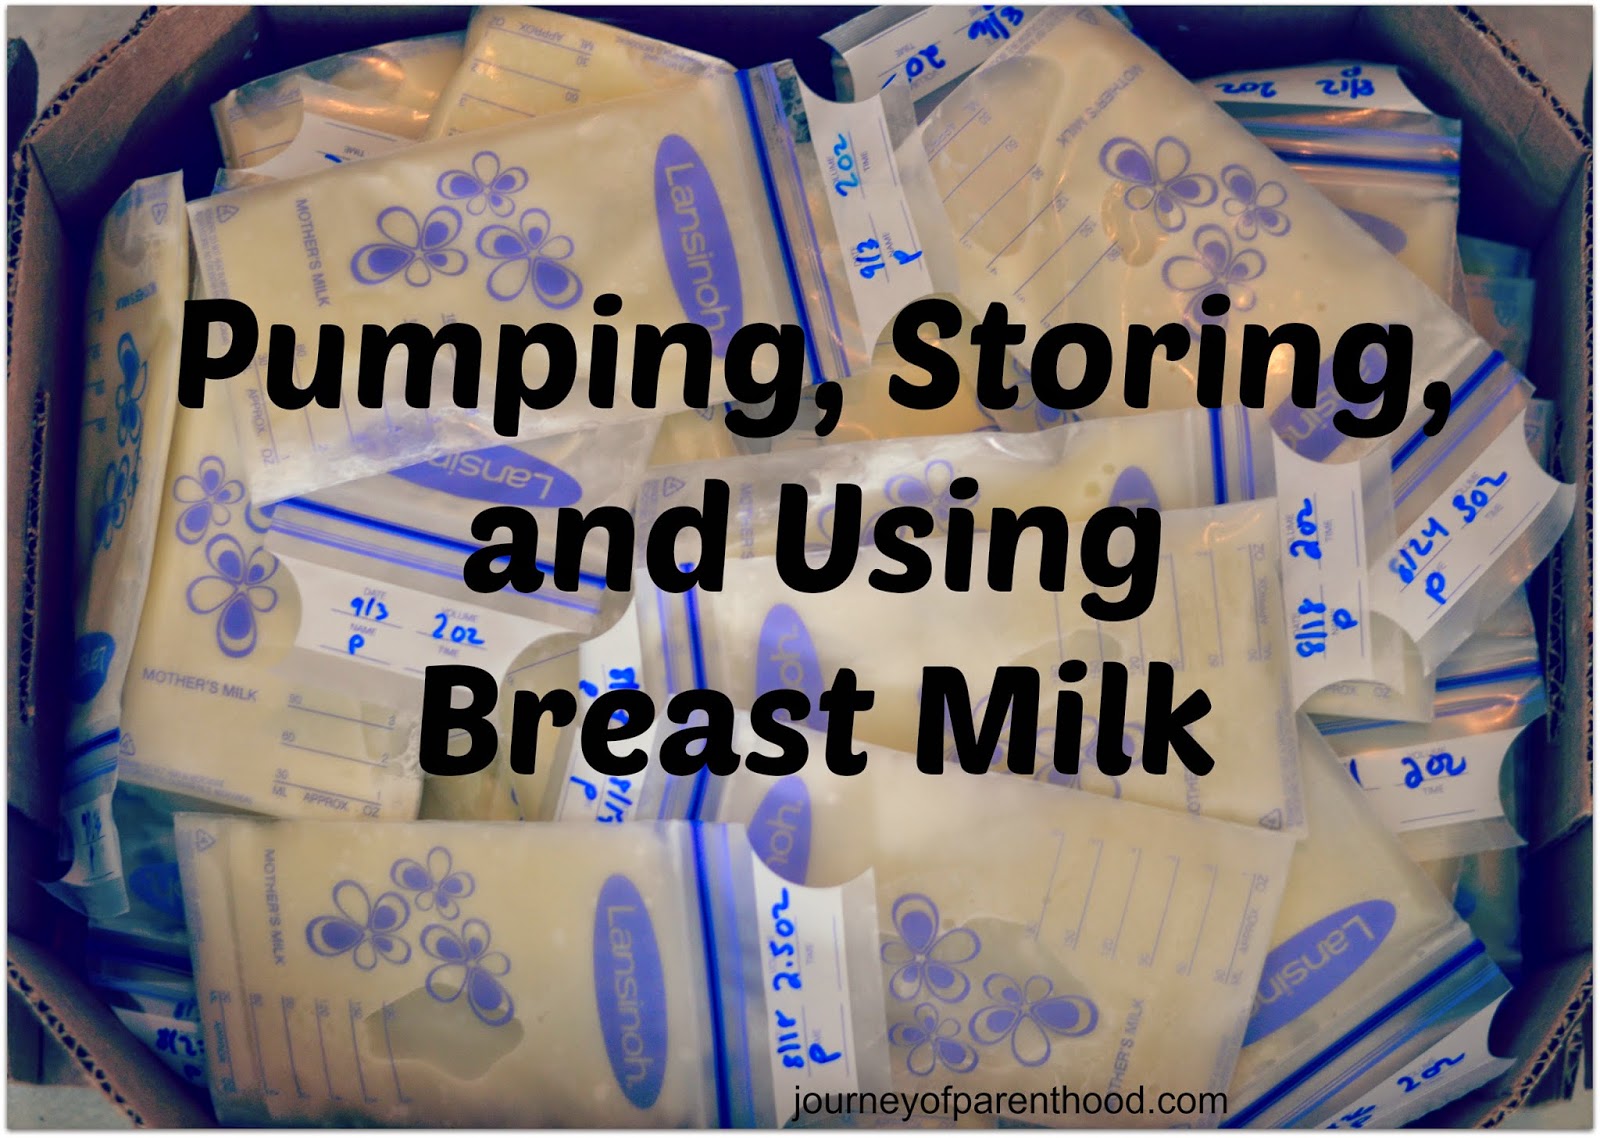 http://www.journeyofparenthood.com/2014/12/pumping-storing-and-using-breast-milk.html